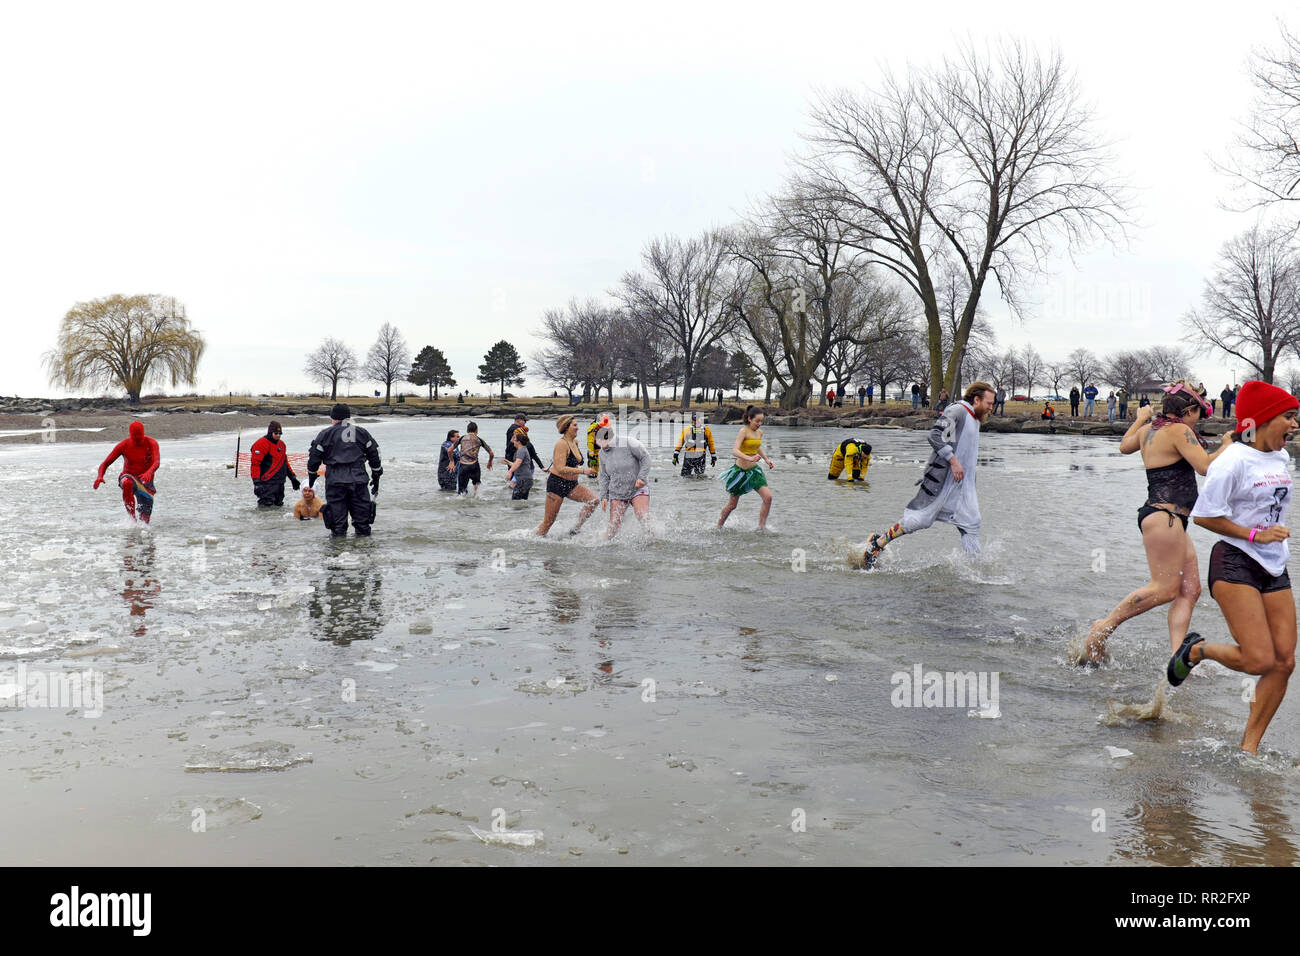 Cleveland, Ohio, USA.  23rd Feb, 2019.  Participants in the 2019 Cleveland Polar Plunge brave the ice-filled waters of Lake Erie to help raise money for the Special Olympics.  Over 400 participants took the challenge with many in costumes during this annual winter event.  Credit: Mark Kanning/Alamy Live News. Stock Photo